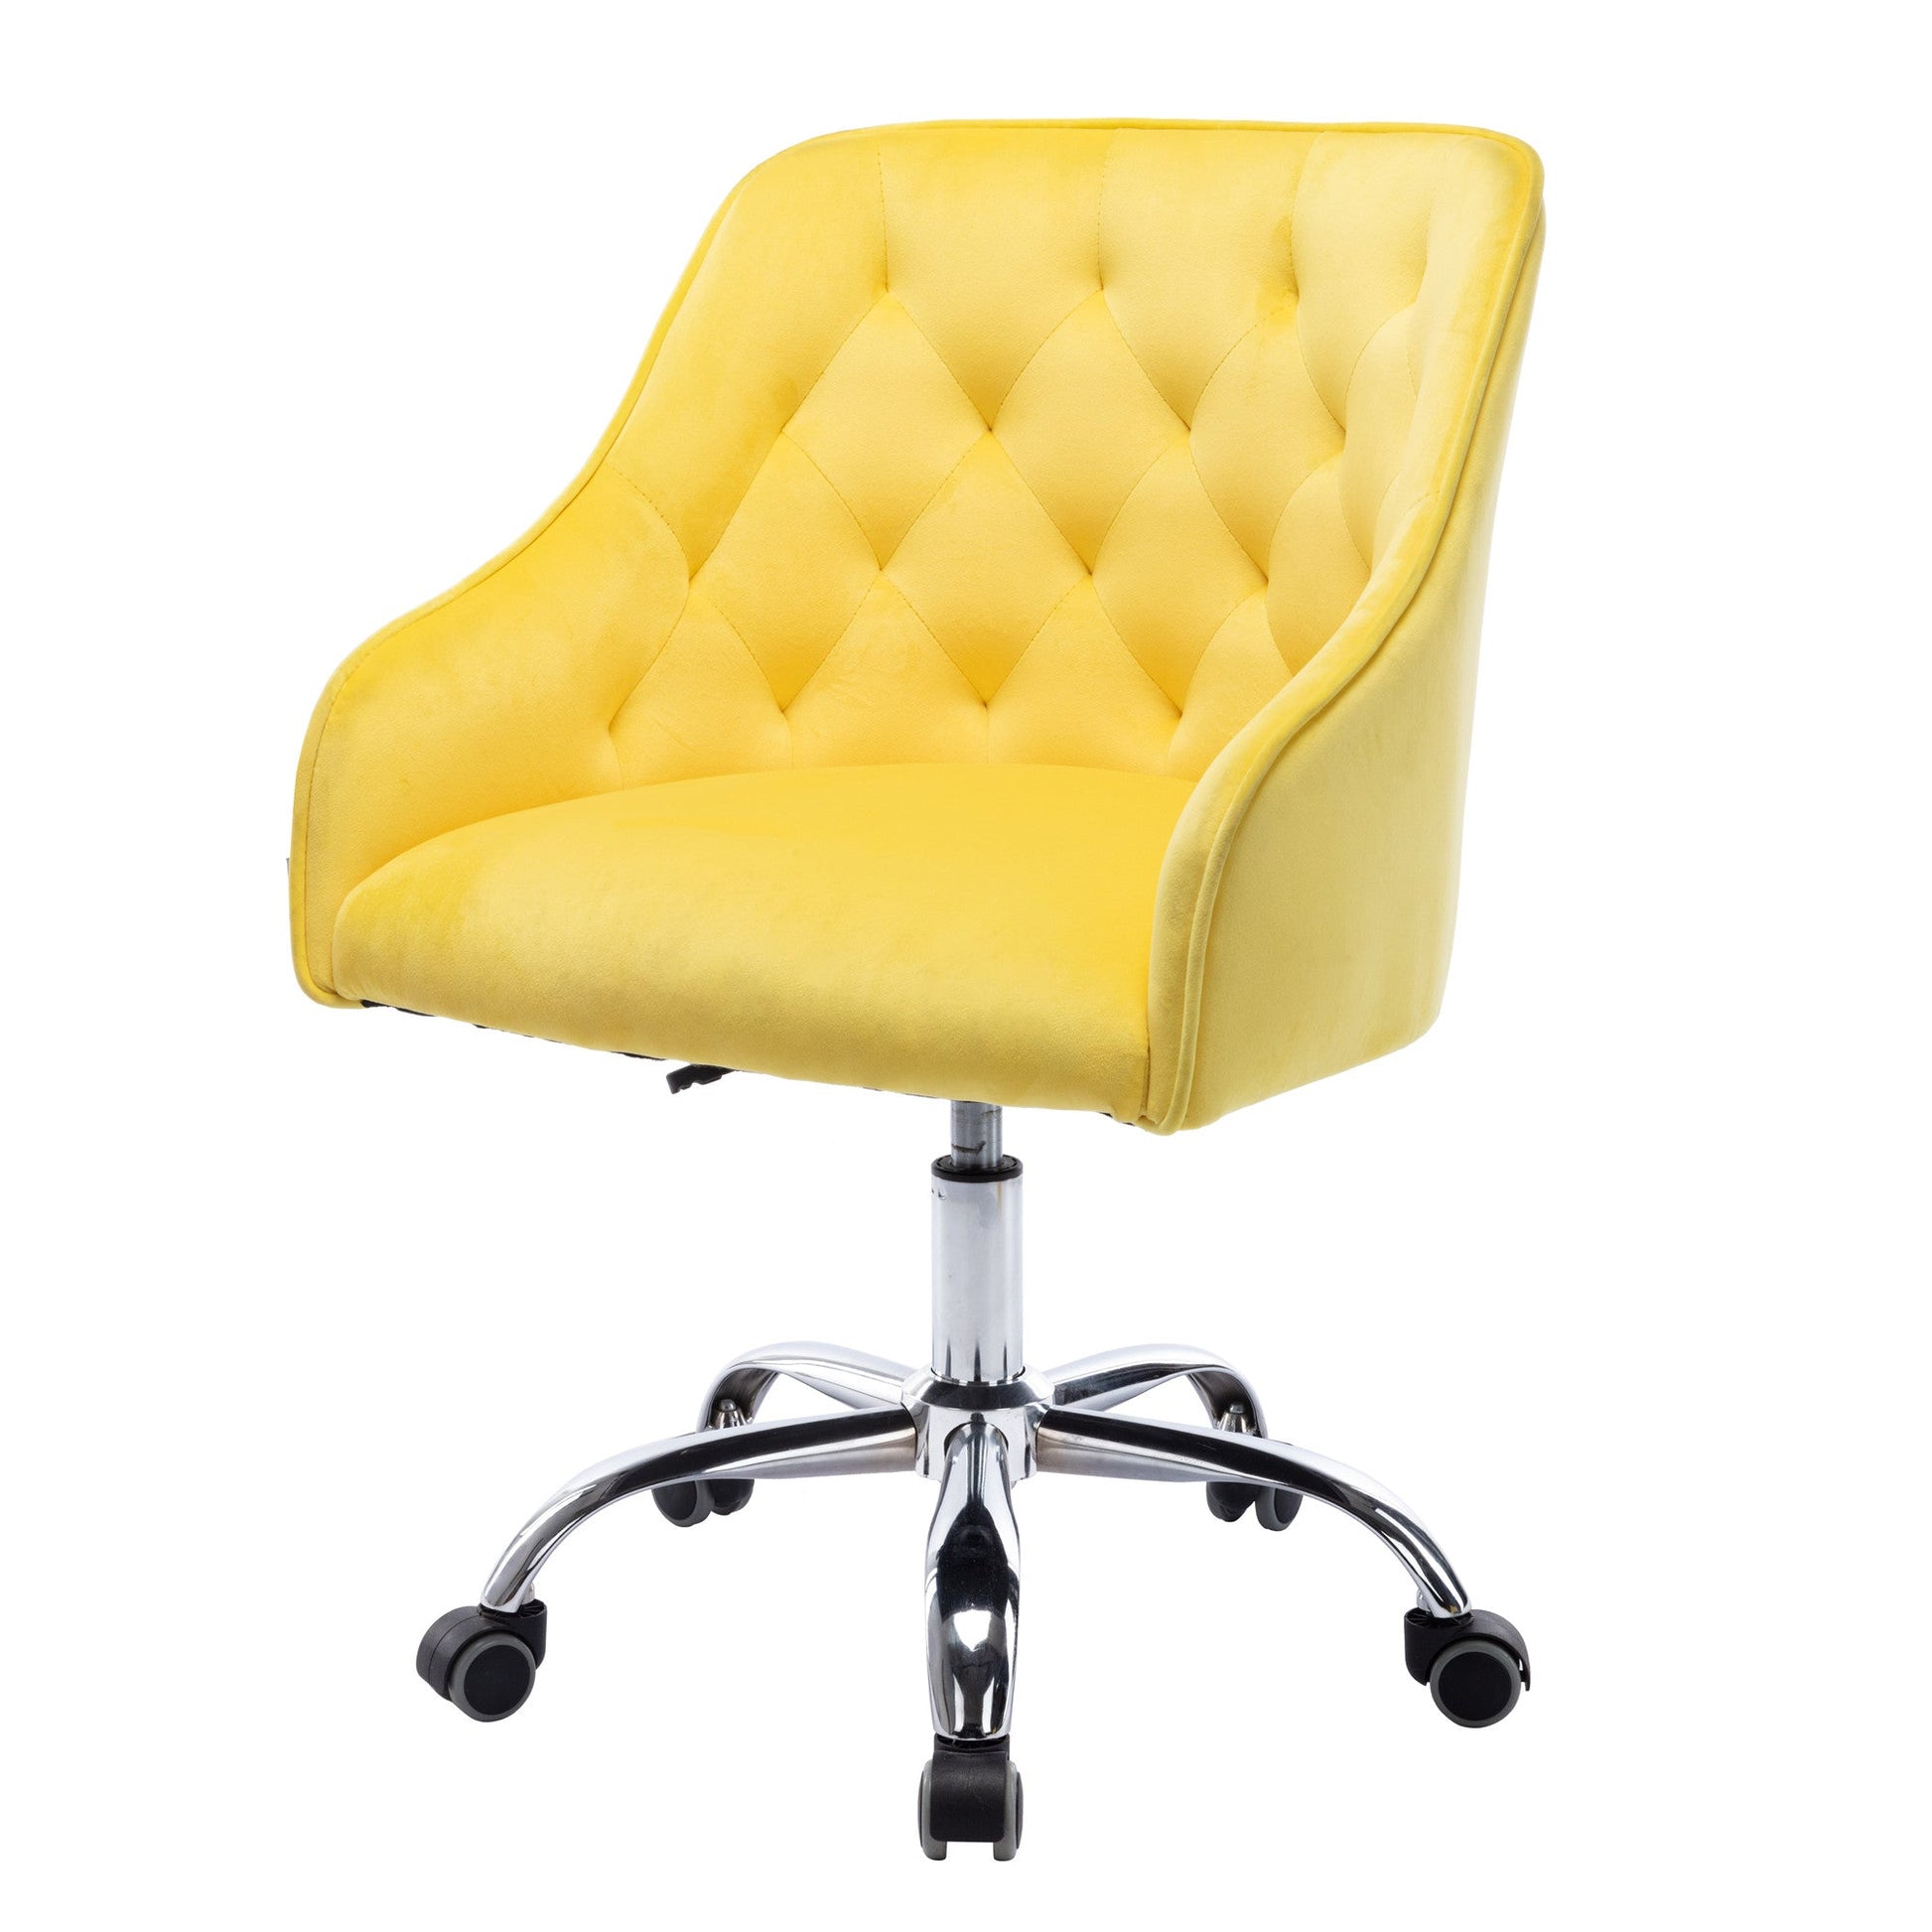 Swivel Shell Chair for Living Room/ Modern Leisure office Chair - Demine Essentials